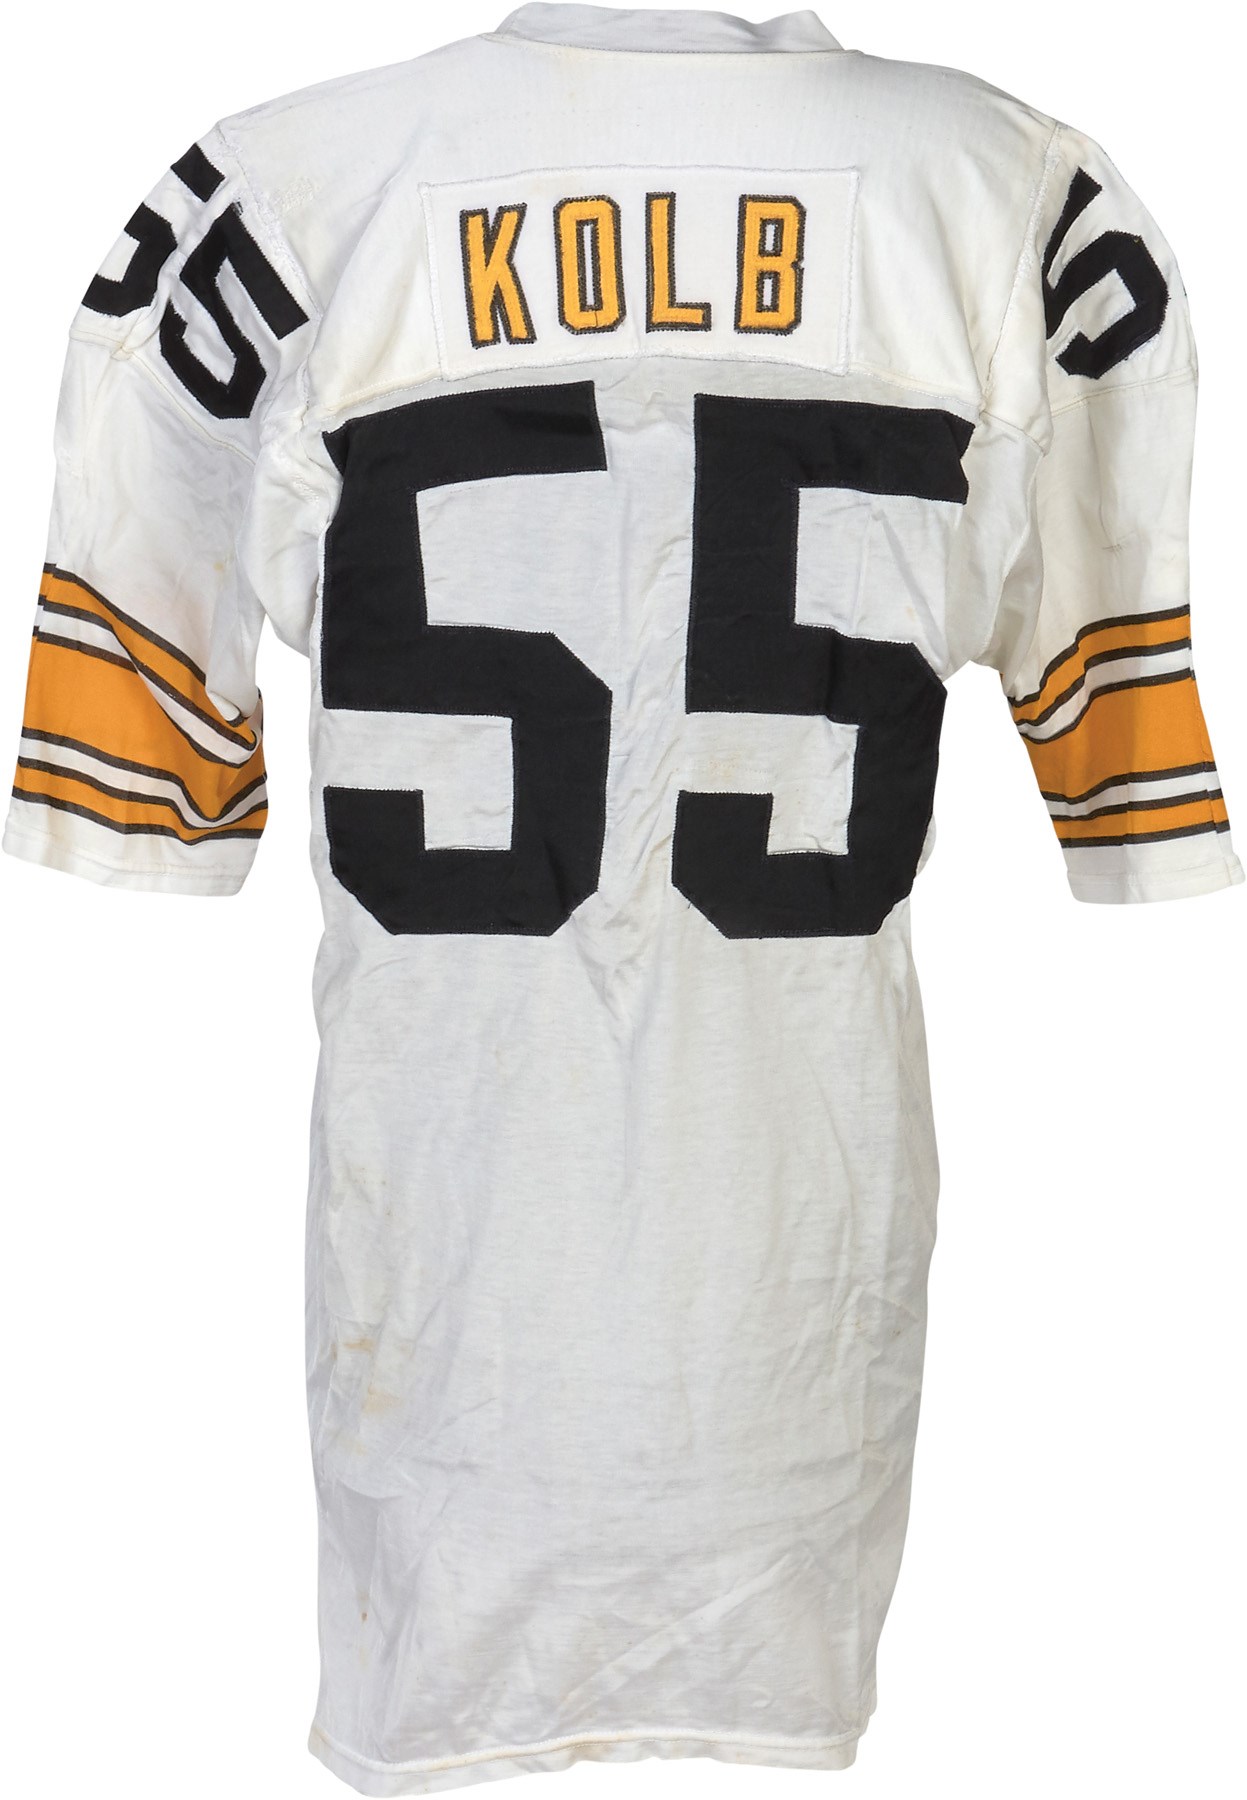 The Pittsburgh Steelers Game Worn Jersey Archive - 1977 Jon Kolb Pittsburgh Steelers Game Worn Jersey